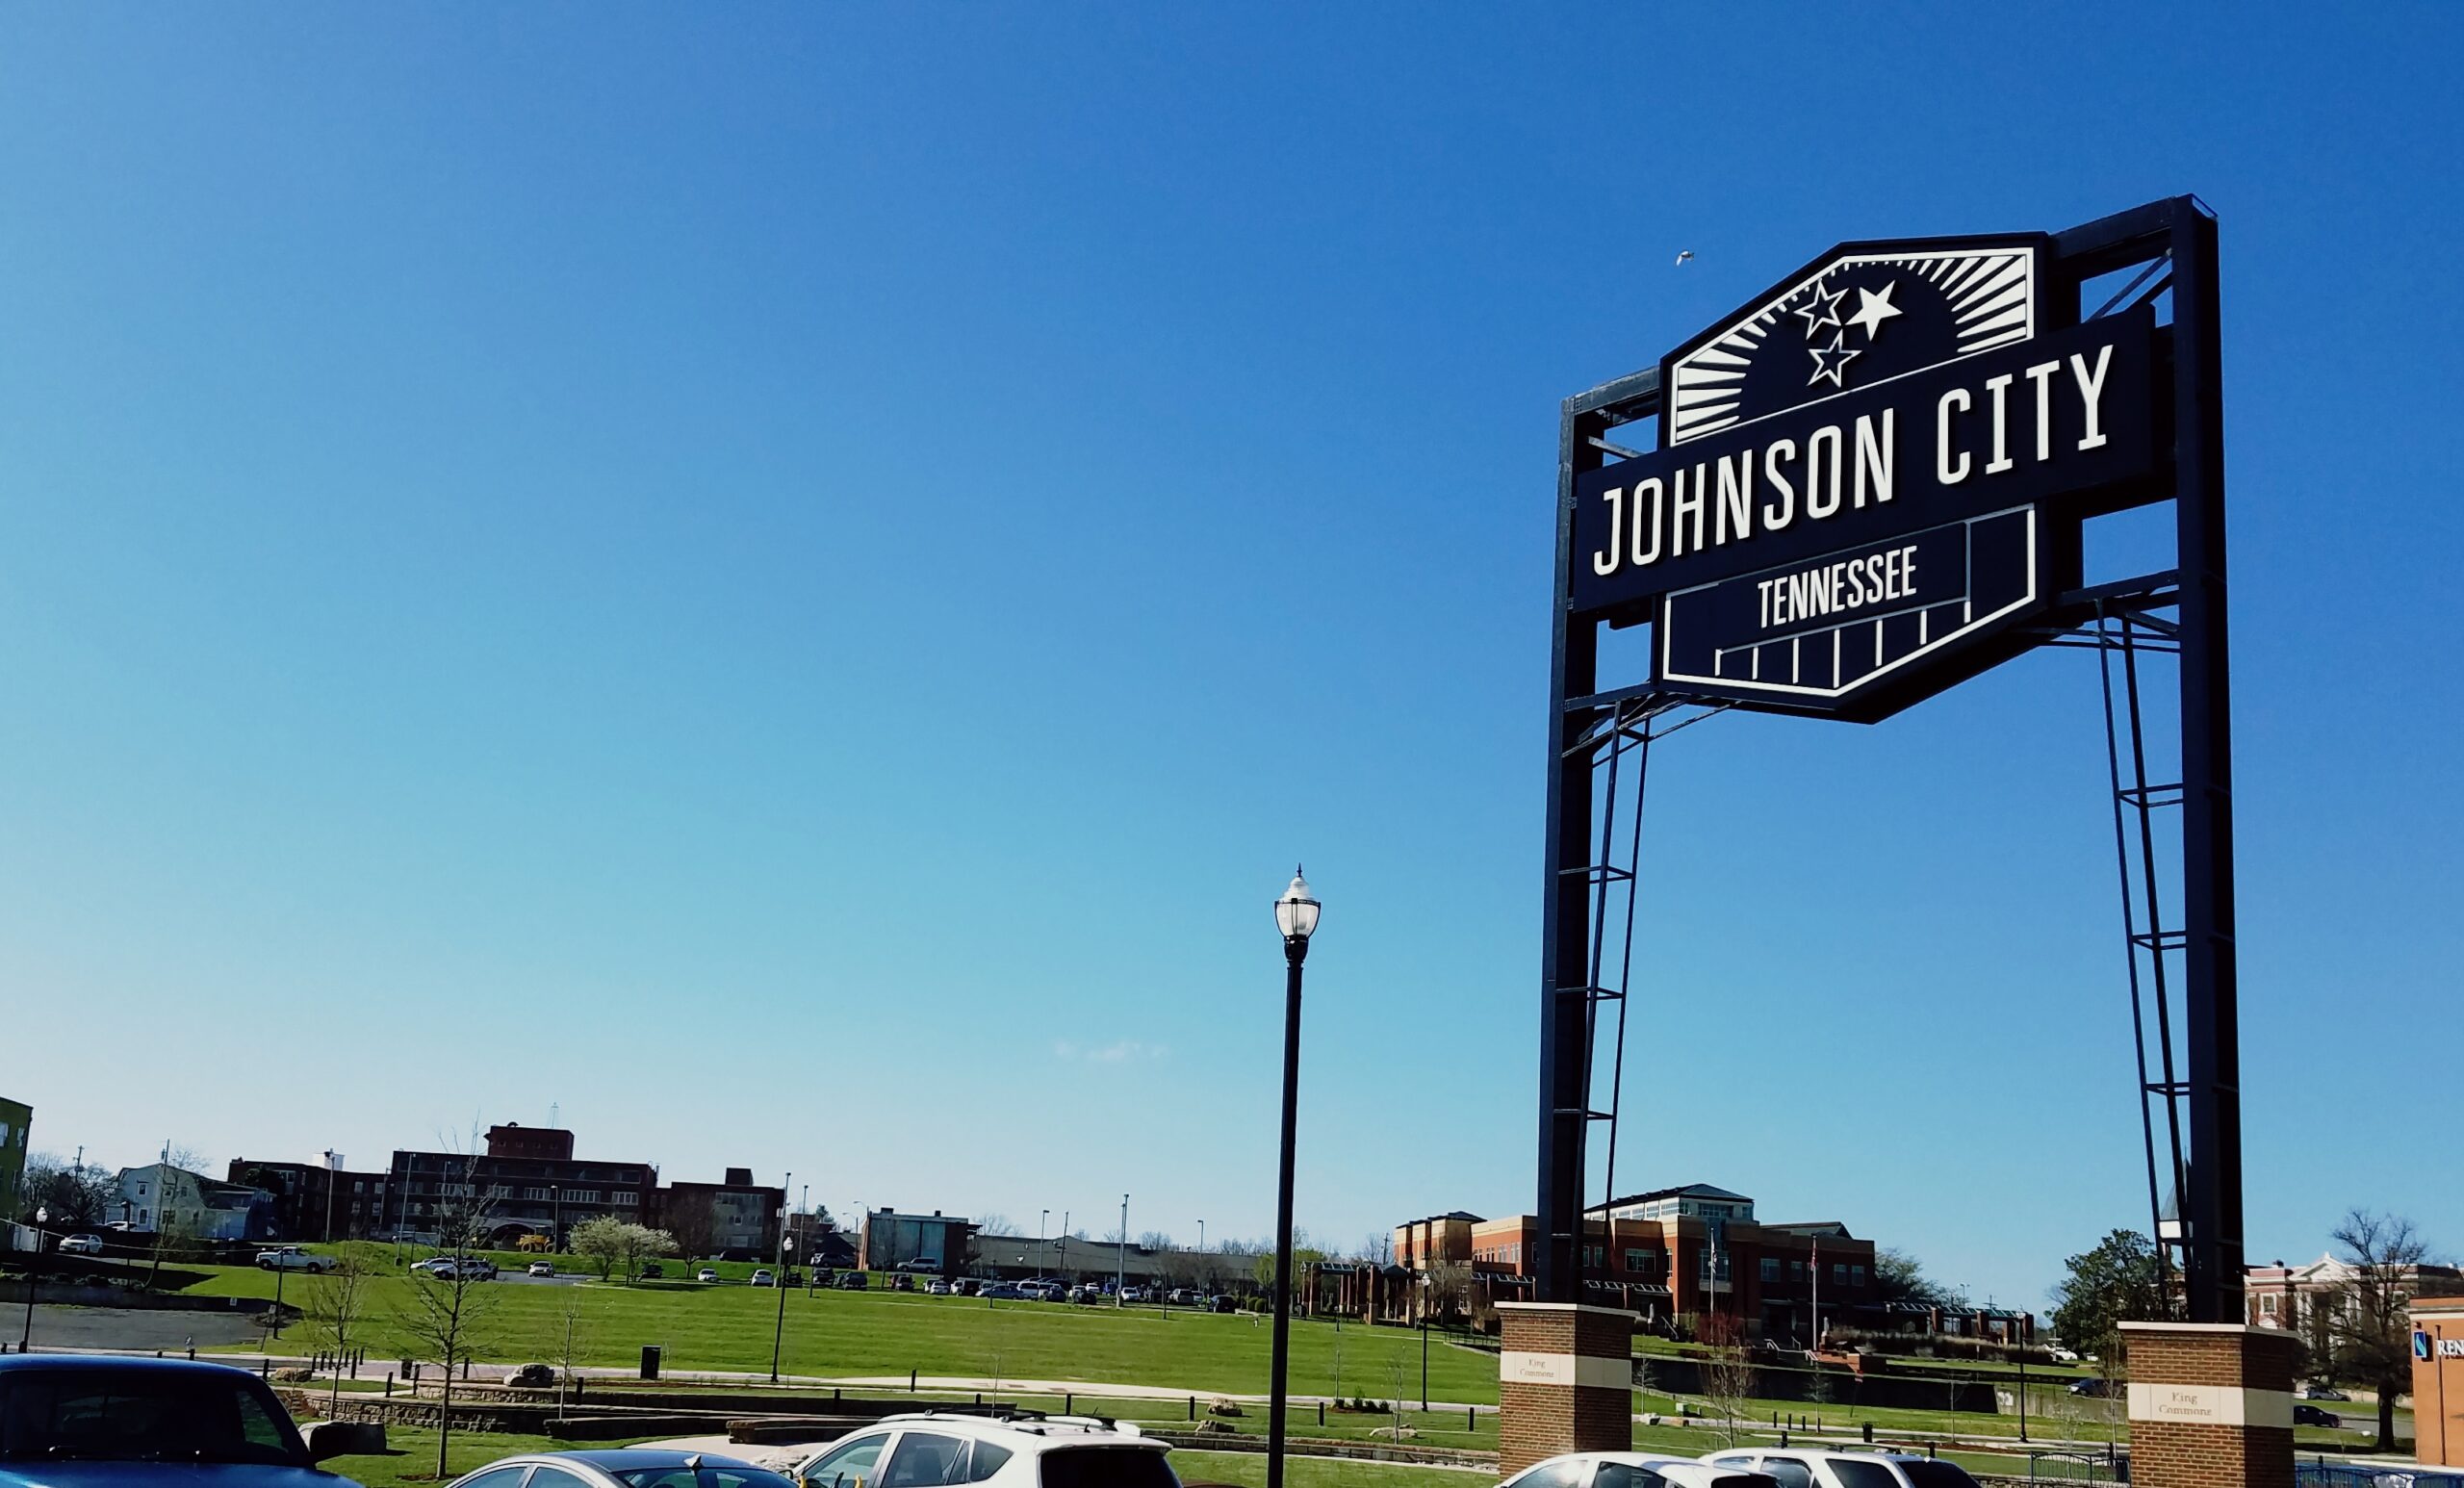 Johnson City Landmark Sign with view of TownView (L) and City Library (R)